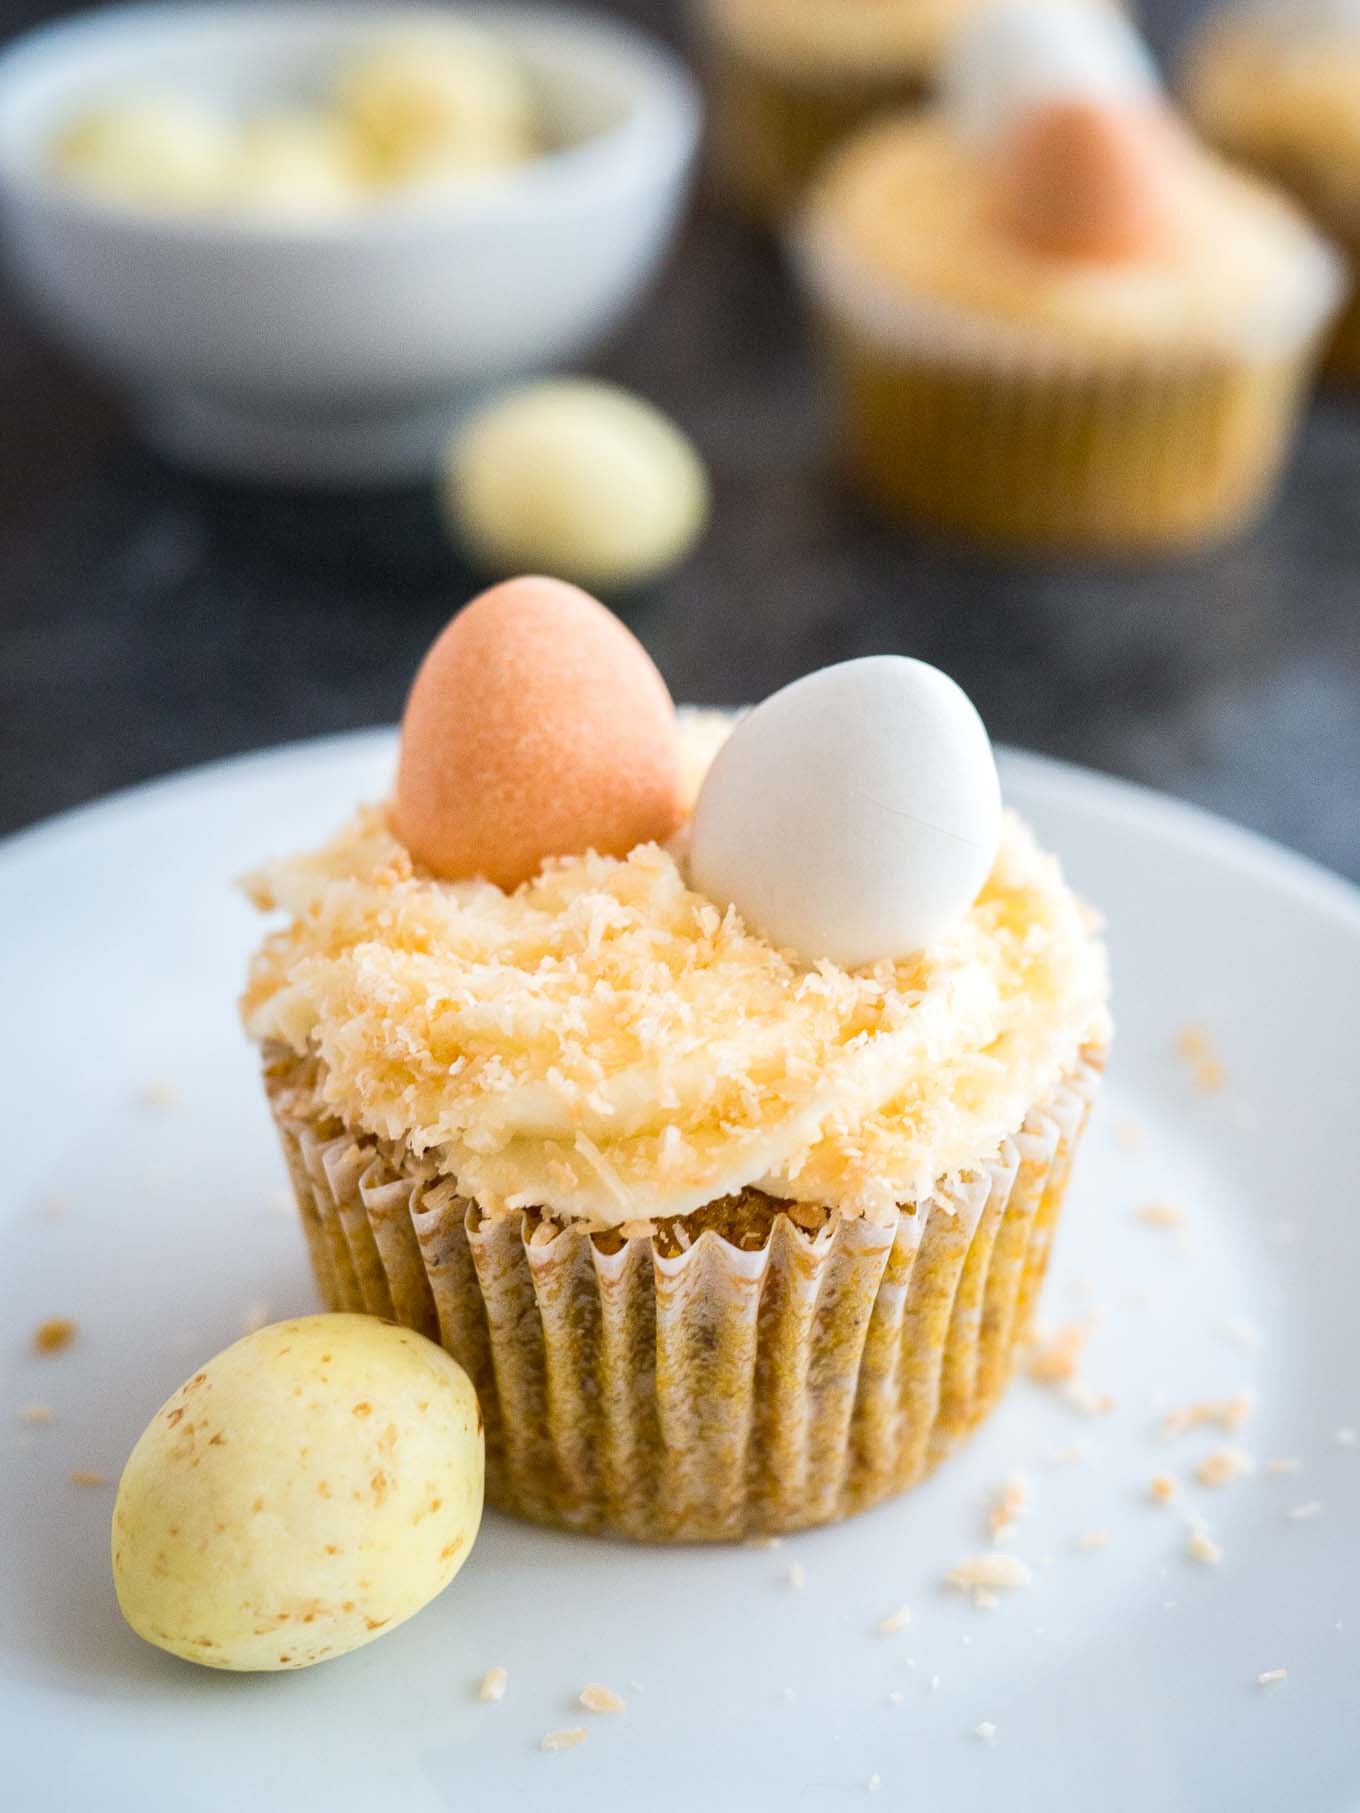 Carrot cake cupcake, topped with cream cheese frosting, coconut and mini eggs, sitting on a white plate next to a sugar egg.